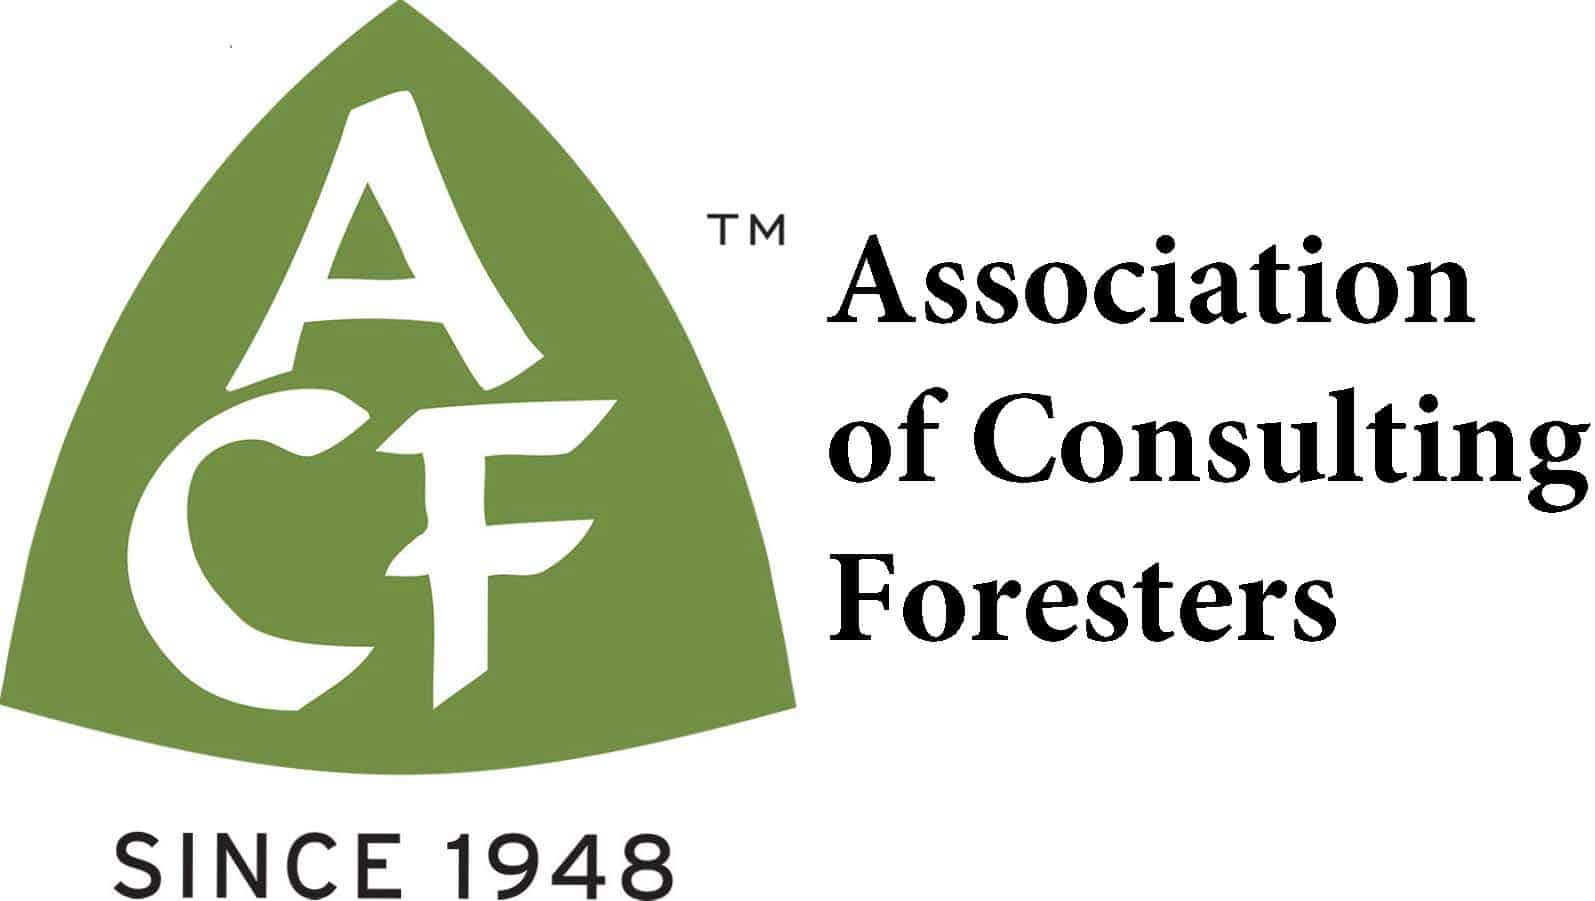 Association of Consulting Foresters of America